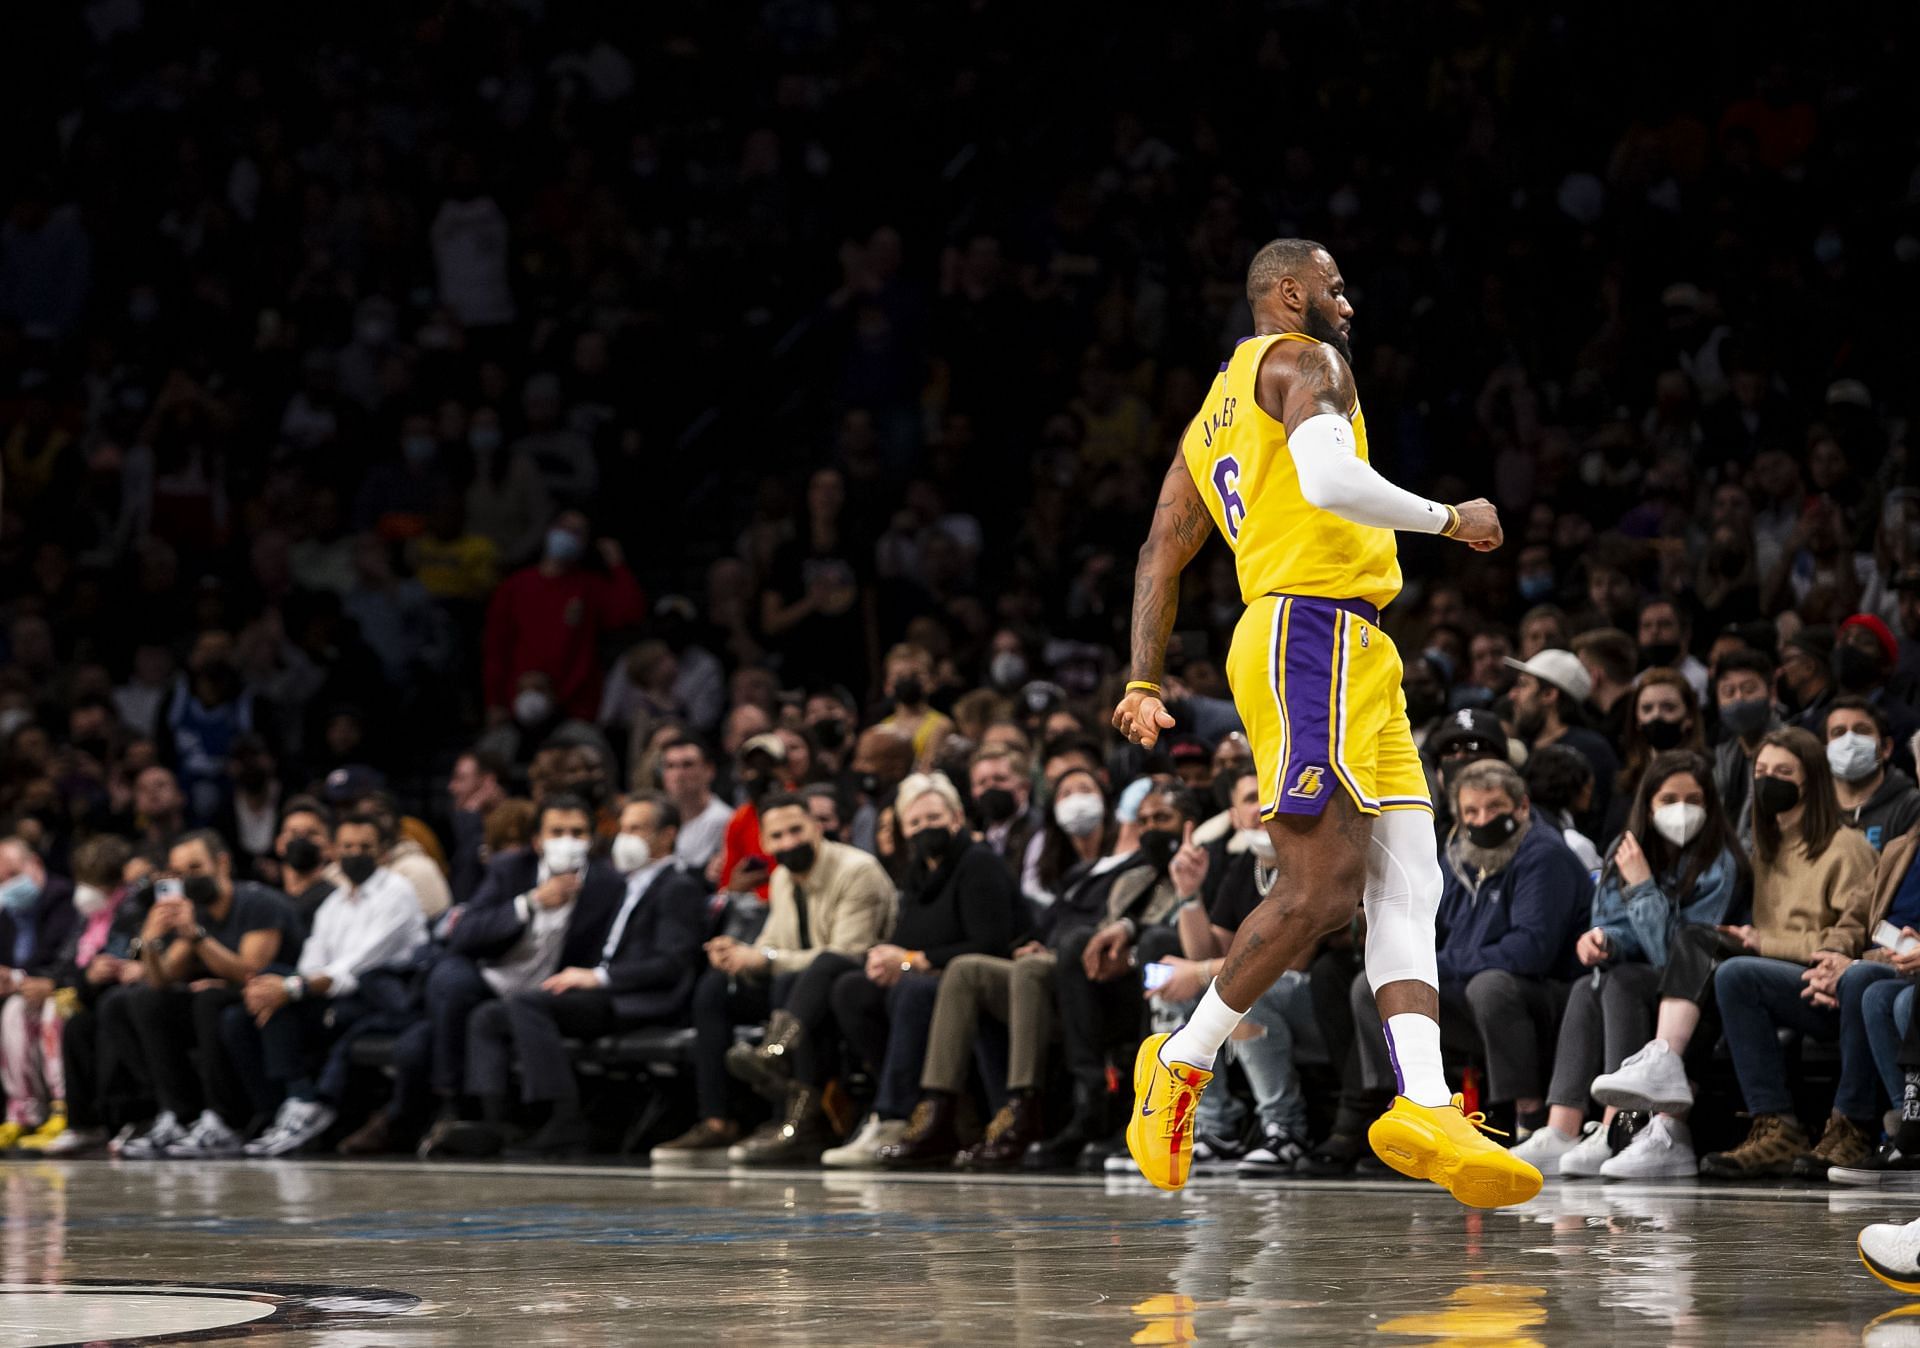 LeBron James #6 of the Los Angeles Lakers skips down court after shot against the Brooklyn Nets at Barclays Center on January 25, 2022 in the Brooklyn borough of New York City.